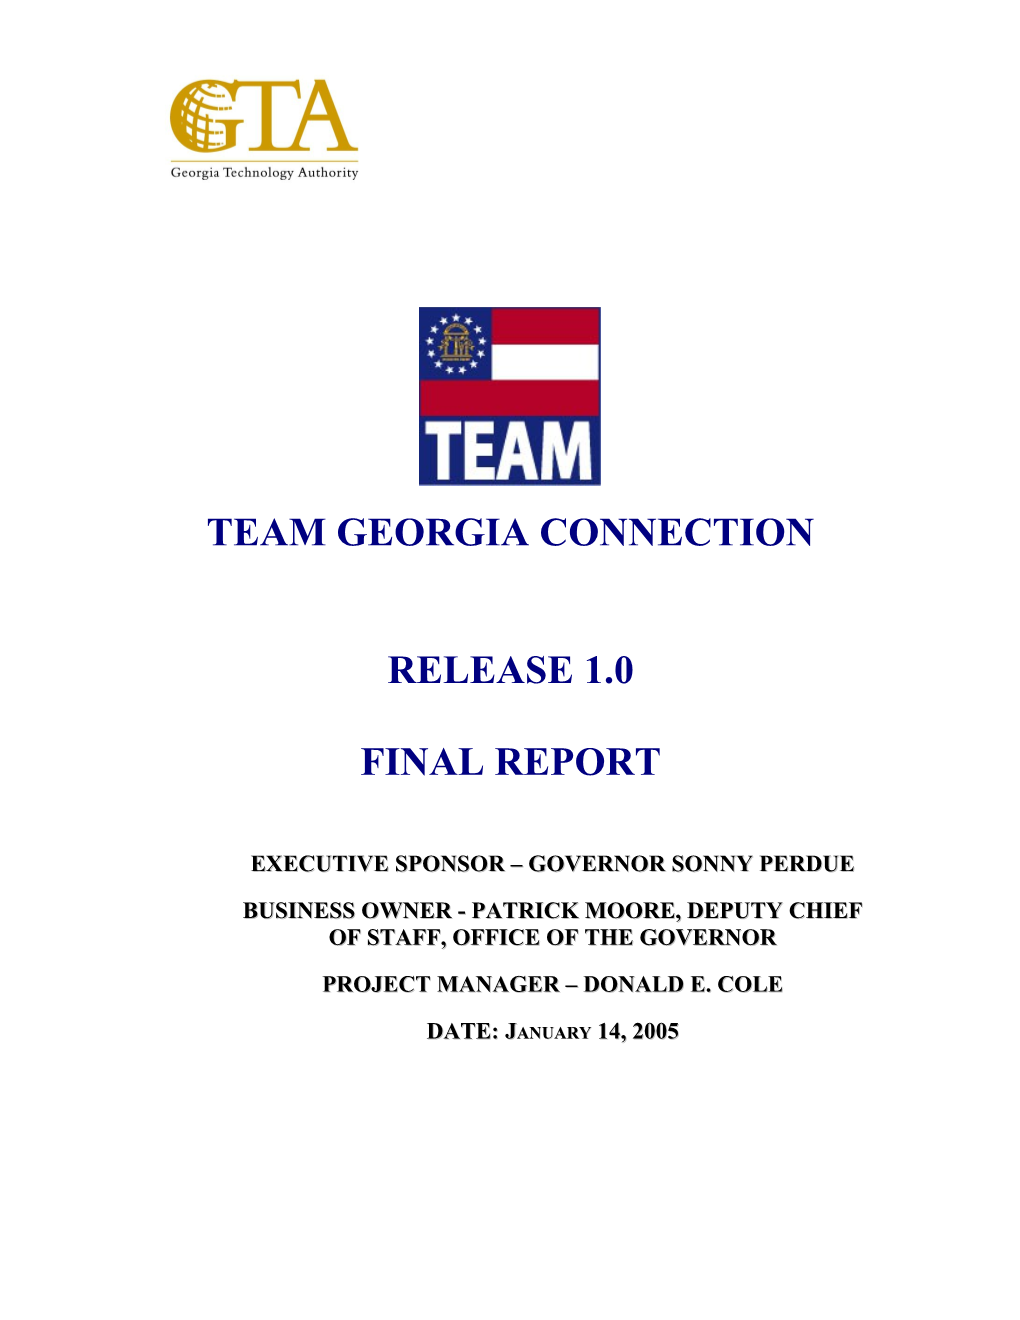 Final Report - Team Georgia Connection